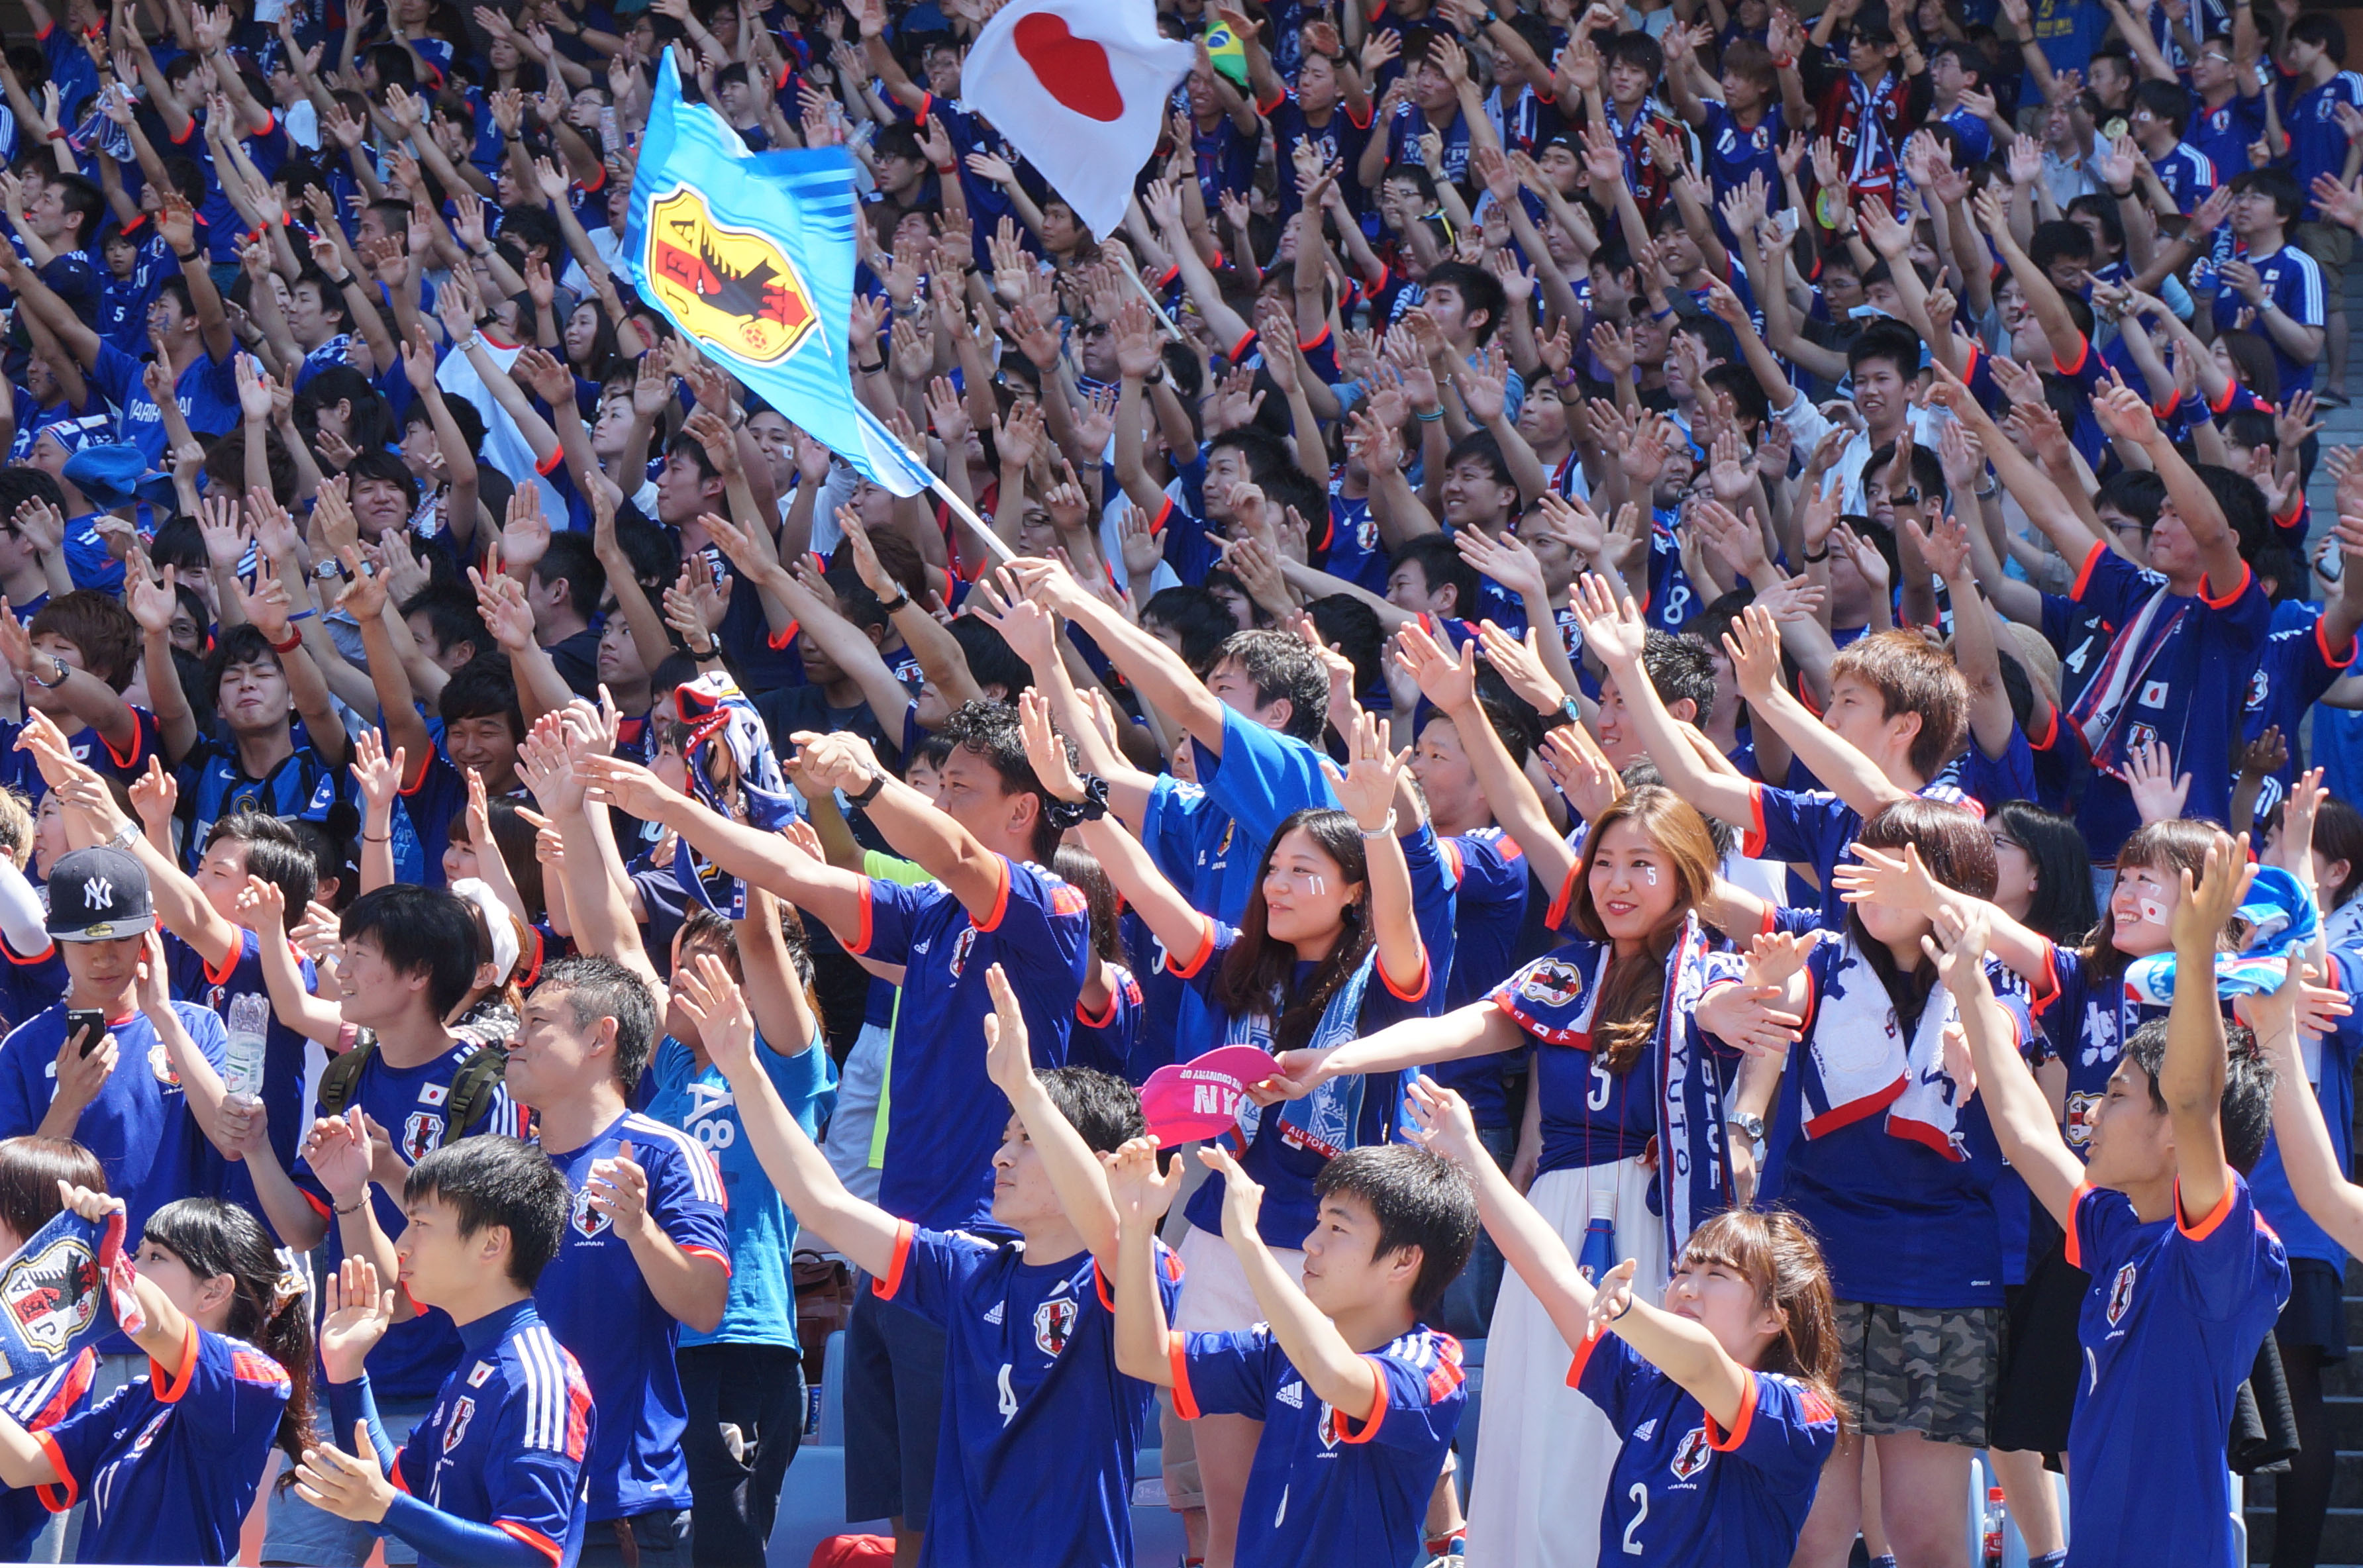 Thousands of soccer fans cheer for Japan on Sunday morning in Nissan Stadium in Yokohama, one of the many public sites where they could watch the team play Cote d'Ivoire during the World Cup in Brazil. Japan lost 2-1. | KAZUAKI NAGATA